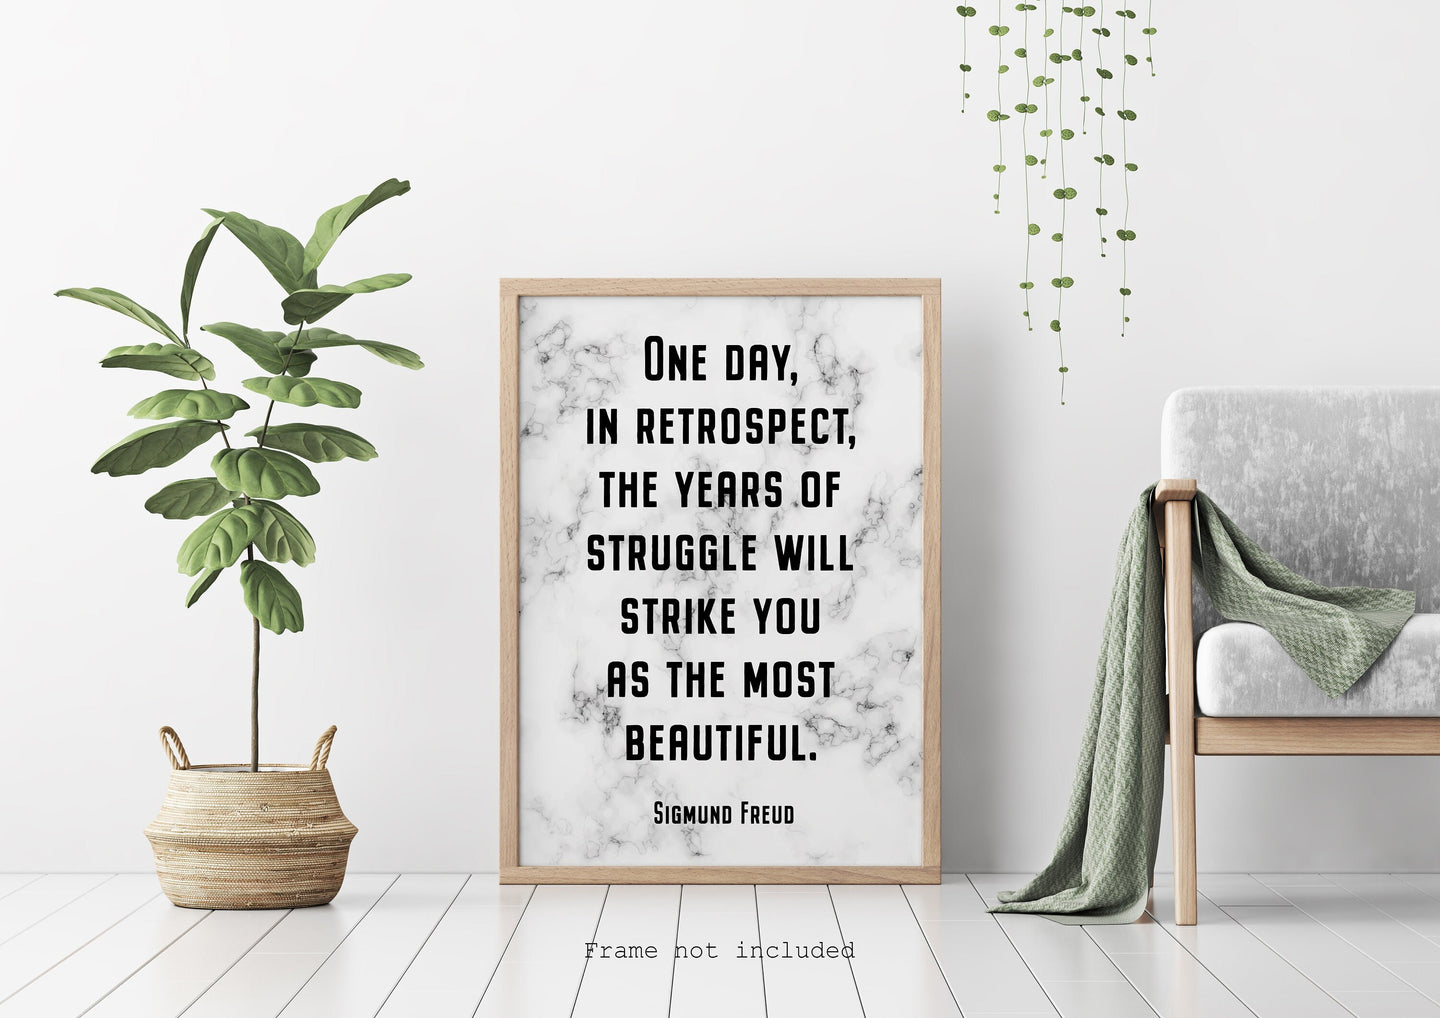 Sigmund Freud quote - One day, in retrospect, the years of struggle - psychology wall art - office decor - marble poster - unframed print